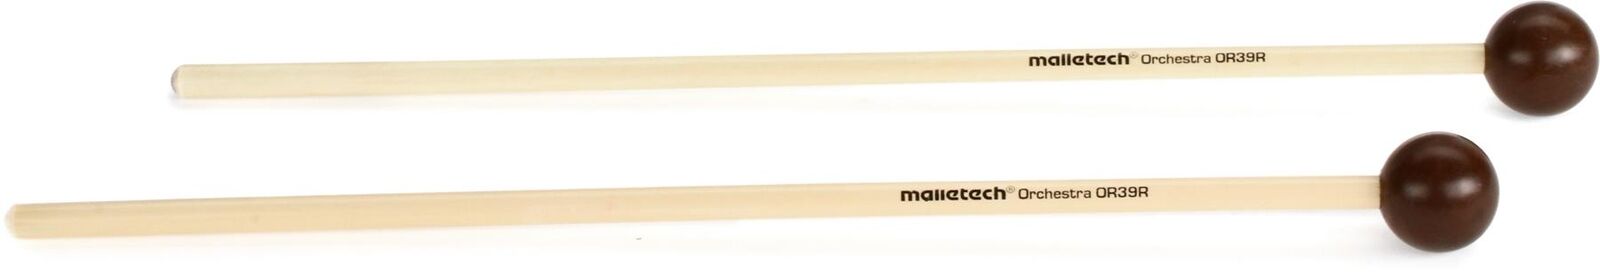 Malletech OR39R Orchestral Series Xylophone Mallets - Brown